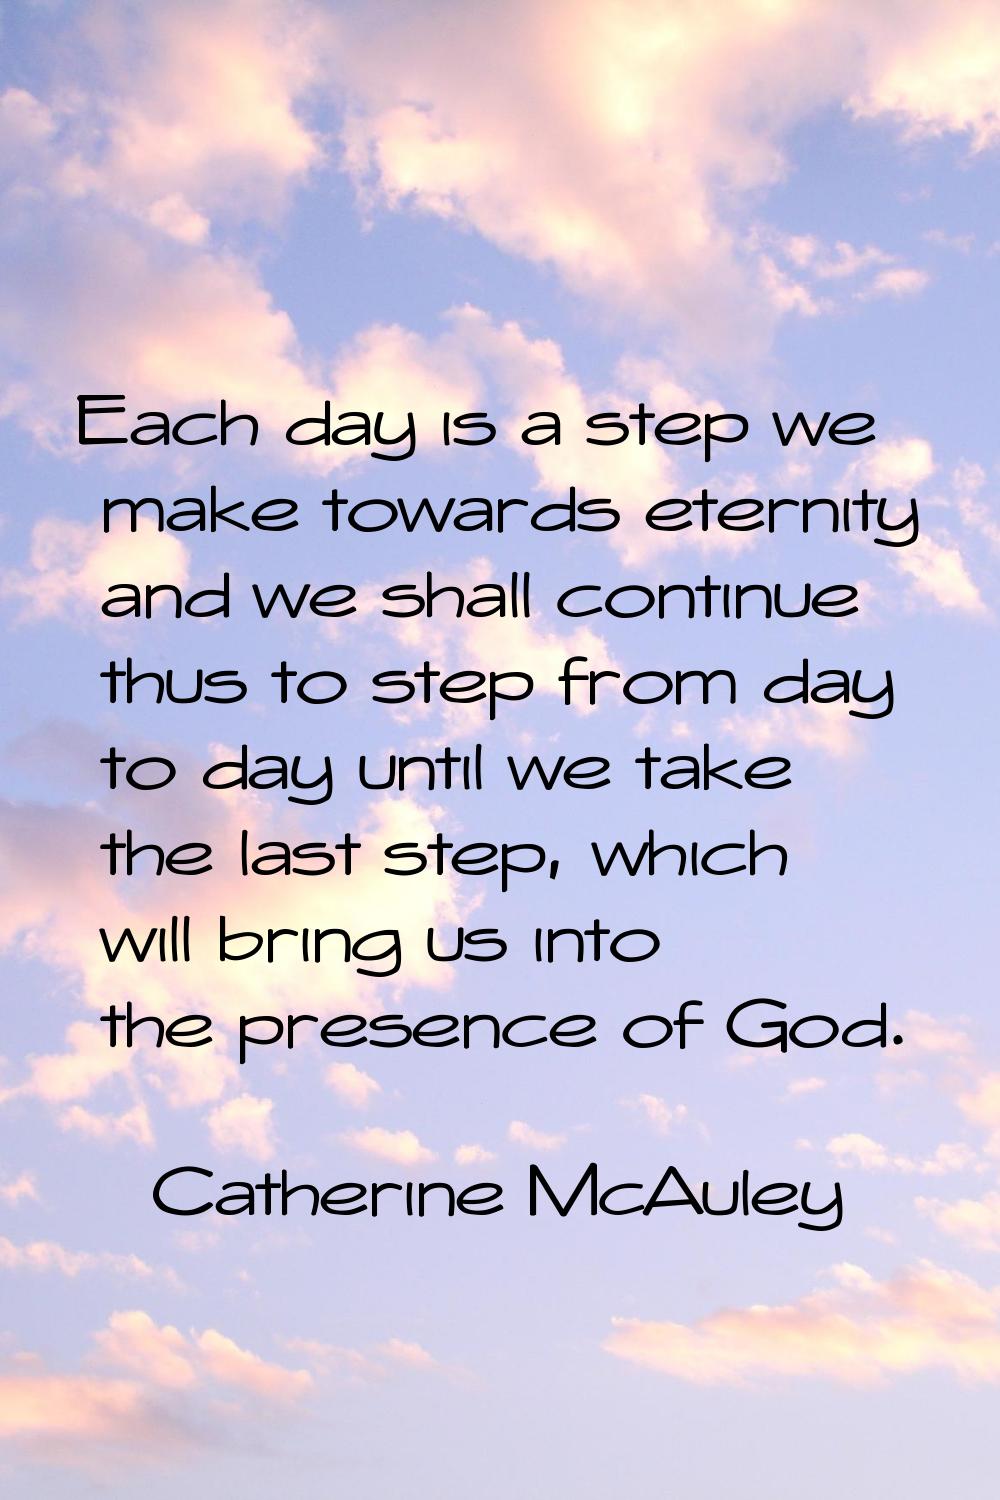 Each day is a step we make towards eternity and we shall continue thus to step from day to day unti